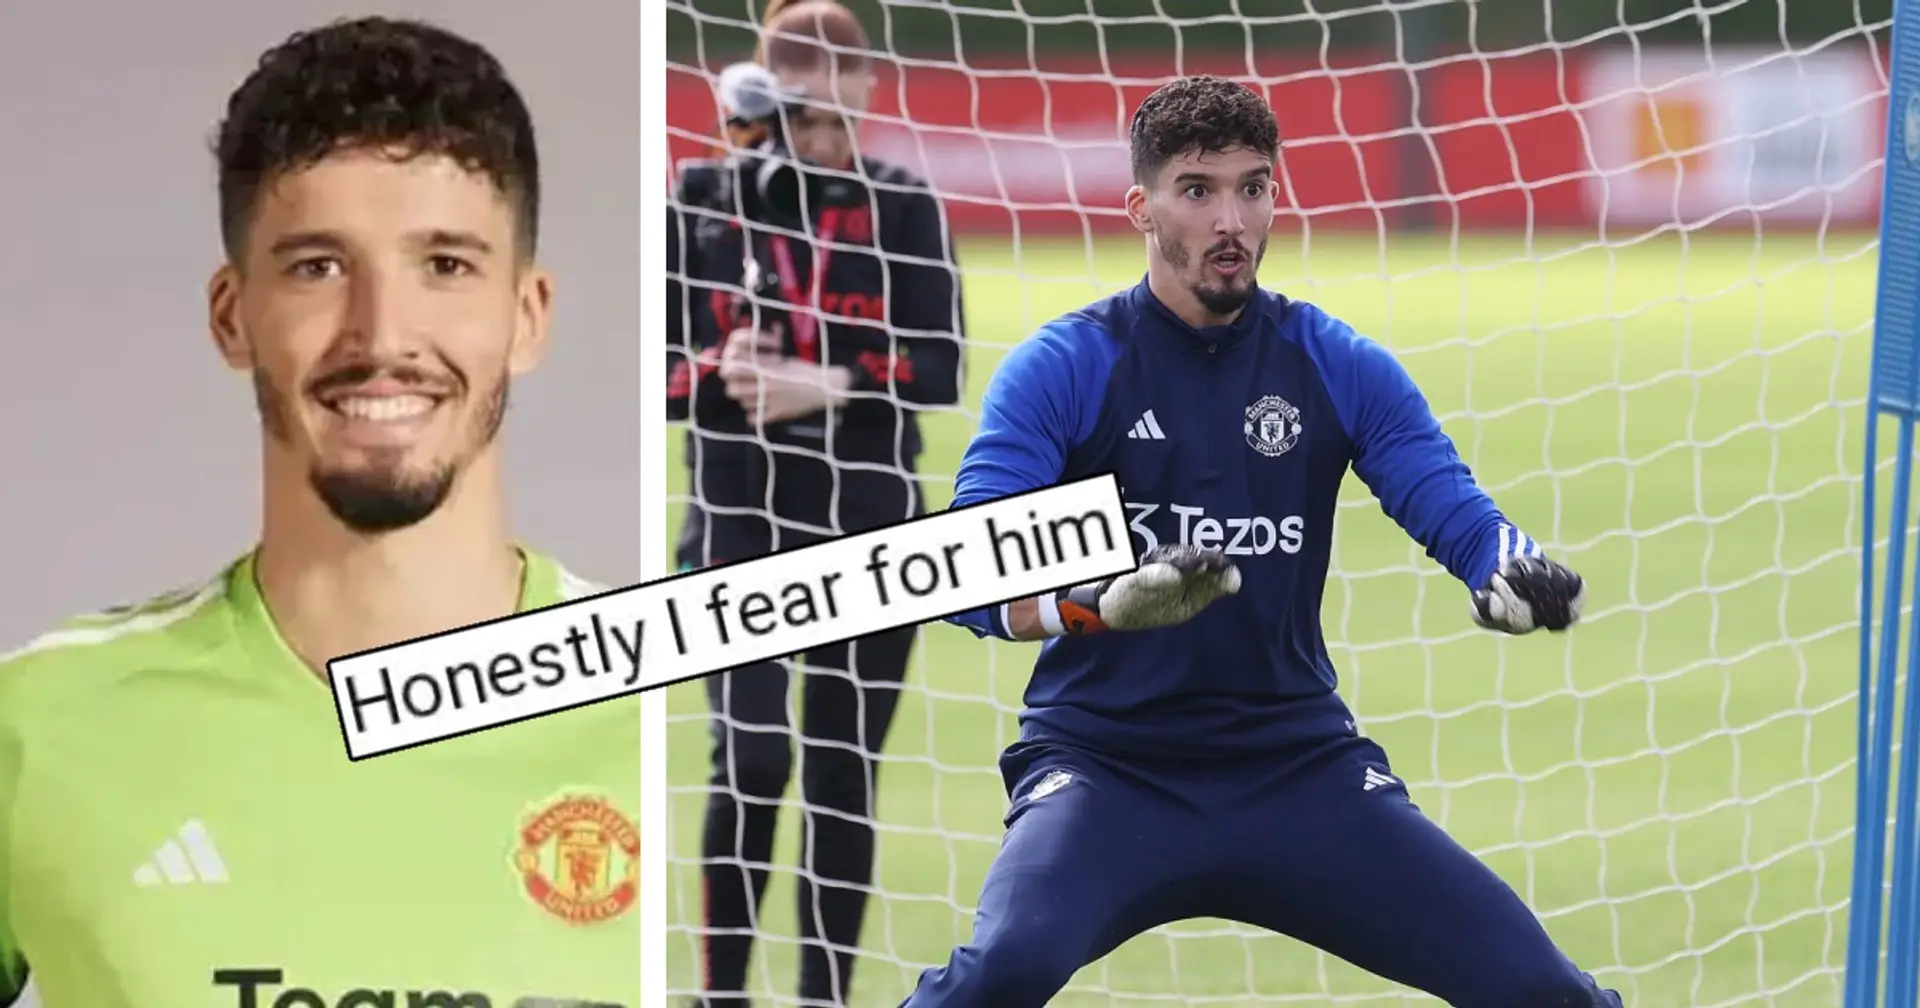 'You have an intelligent goalie': Fenerbahce fans detail what Bayindir could bring to Man United